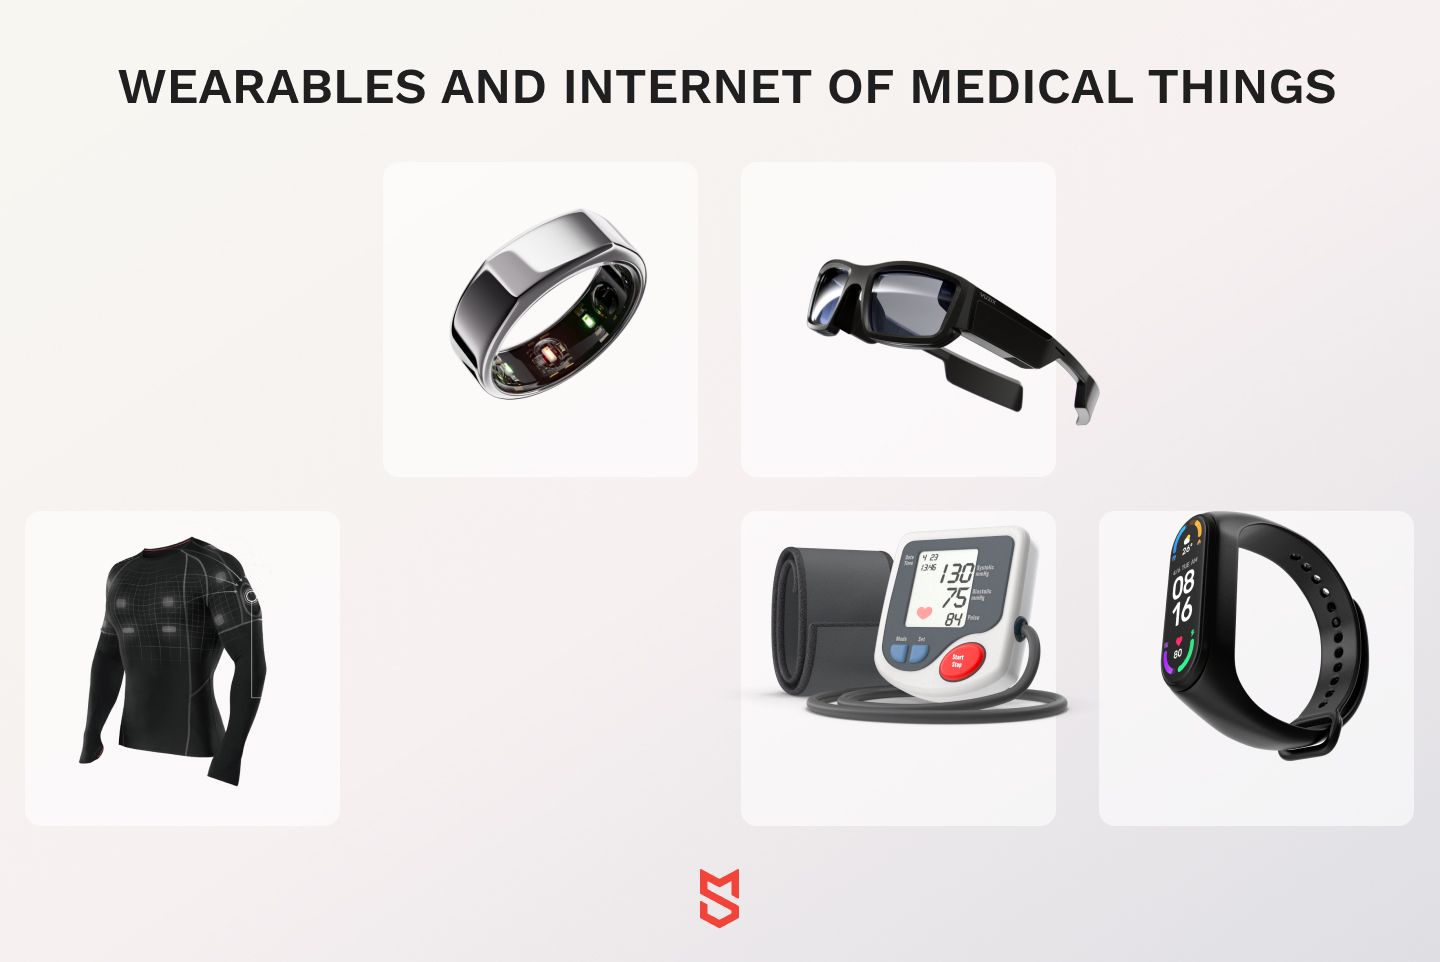 Wearables and Internet of Medical Things (IoMT)